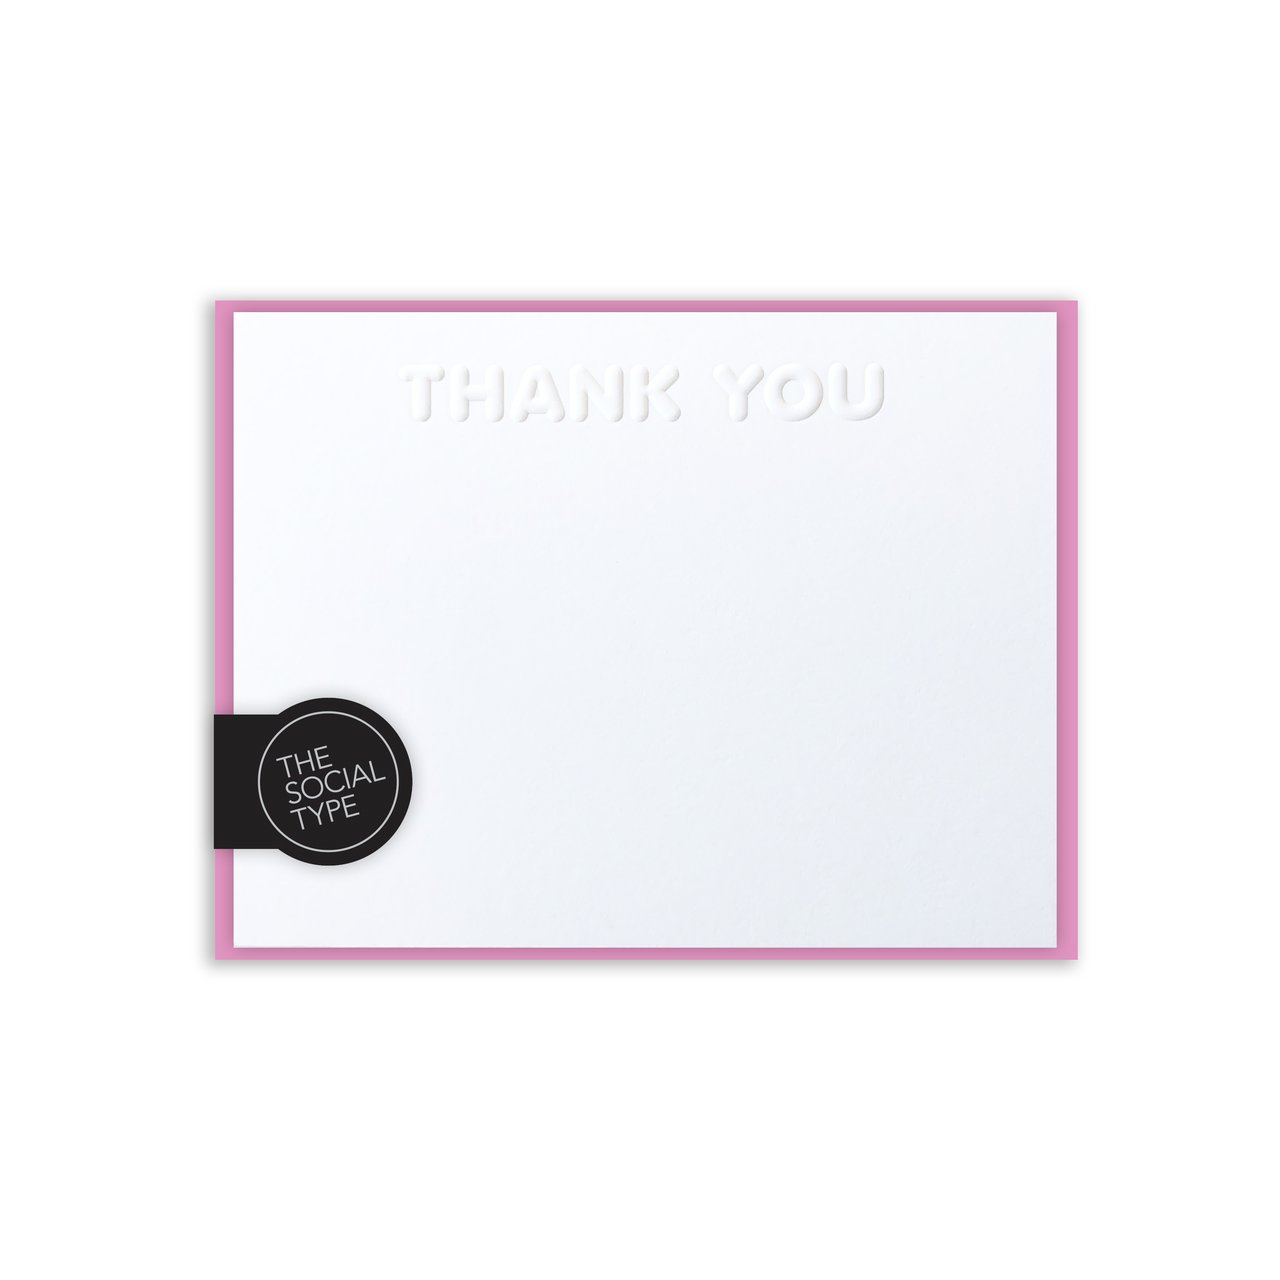 White card with embossed "Thank you" and pink envelopes.